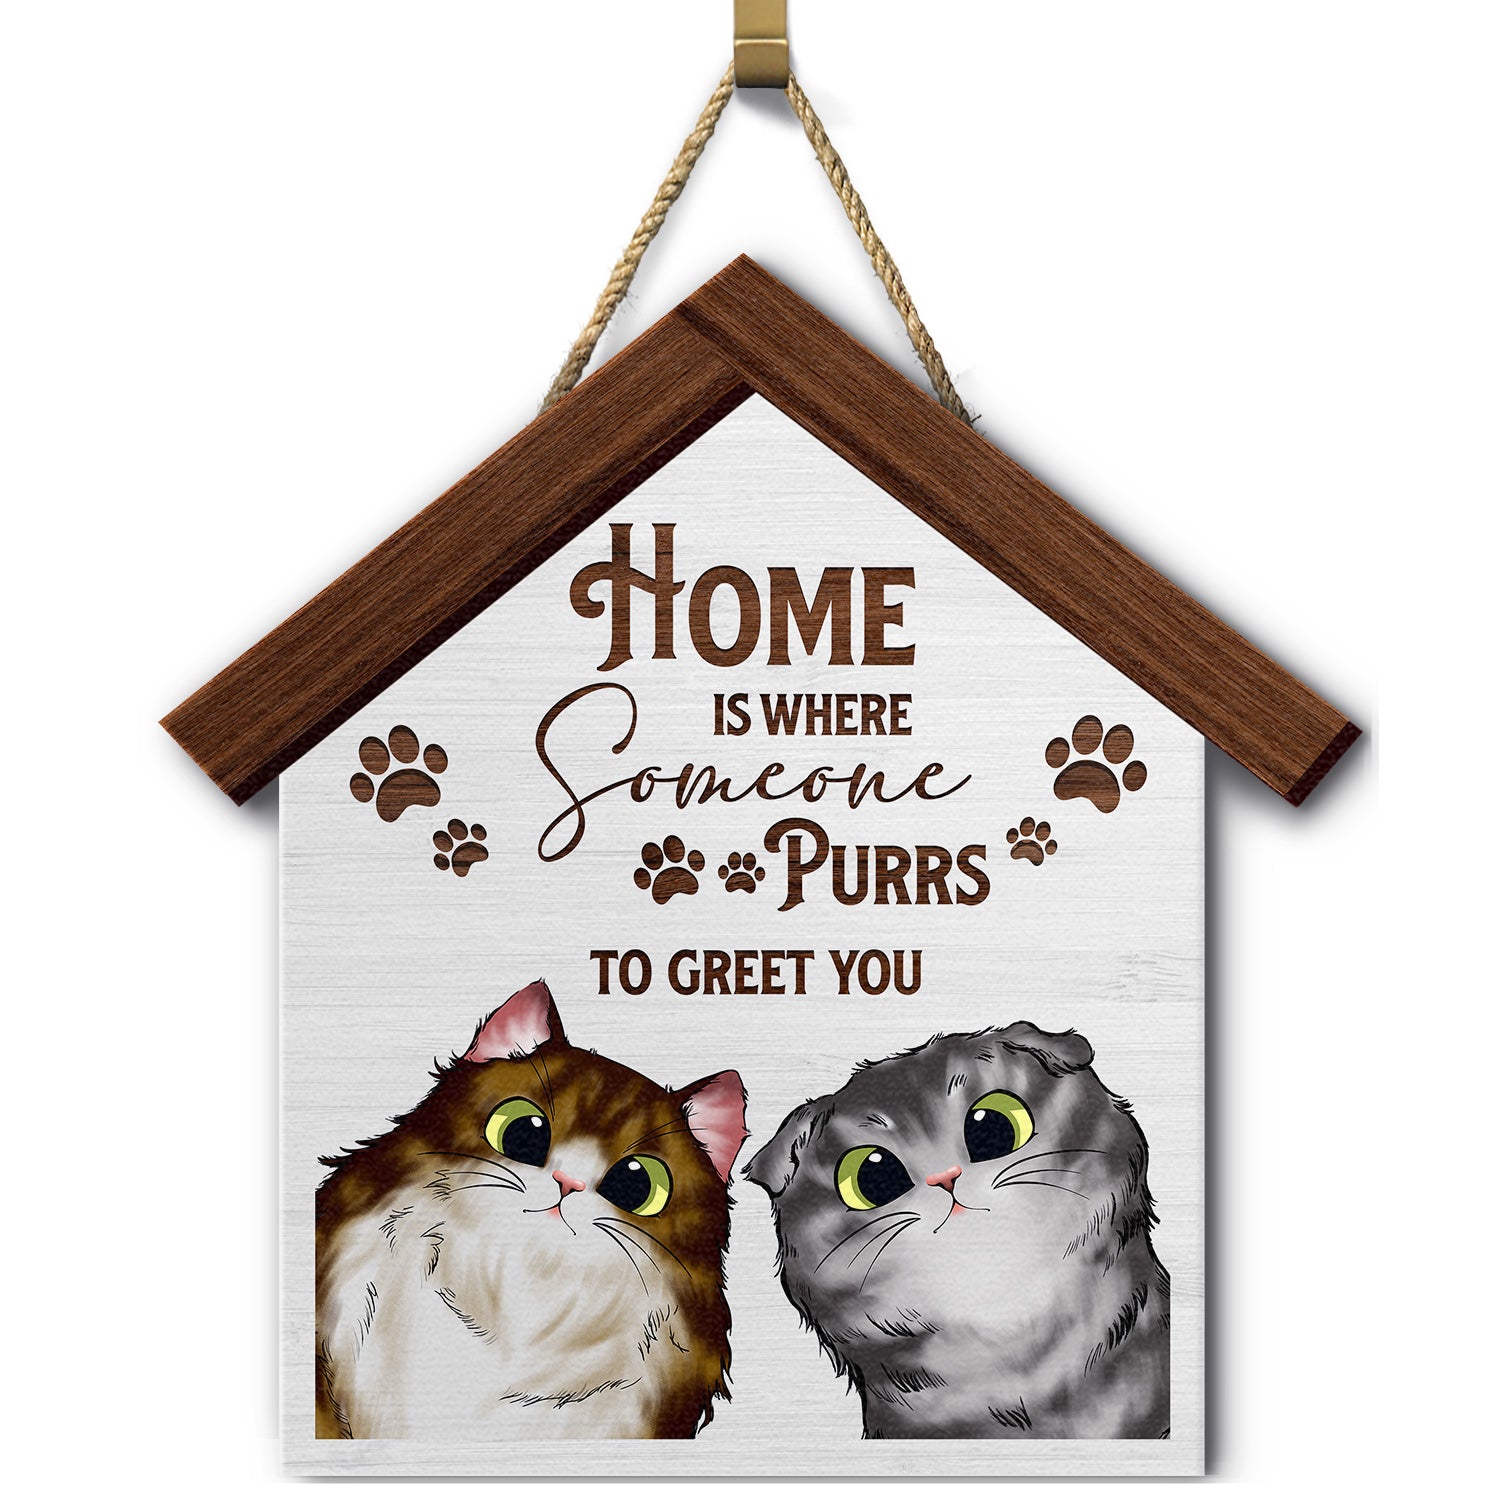 Home Is Where Someone Purrs To Greet You - Birthday, Decor Gift For Cat Lovers, Cat Moms, Cat Dads, Pet Lovers - Personalized Custom Shaped Wood Sign